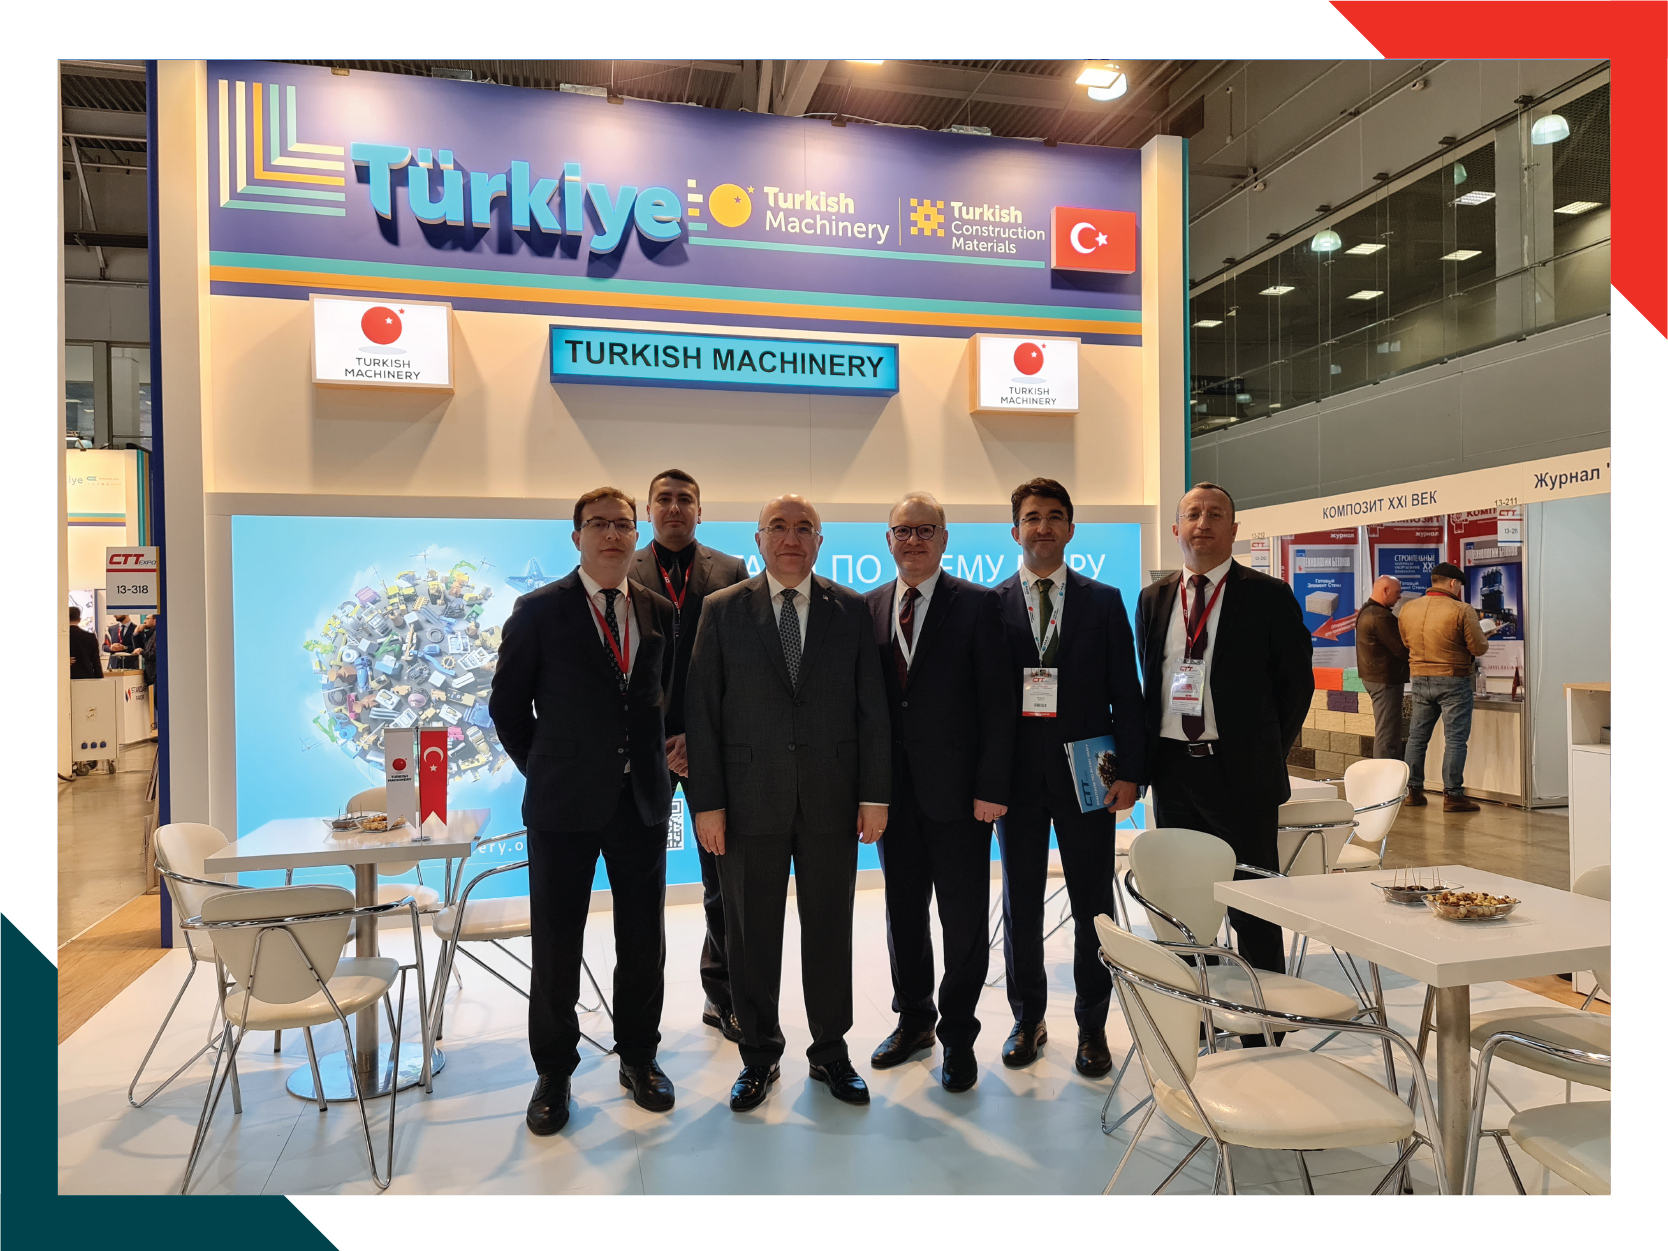 Turkish Machinery has attended CTT Expo 2022